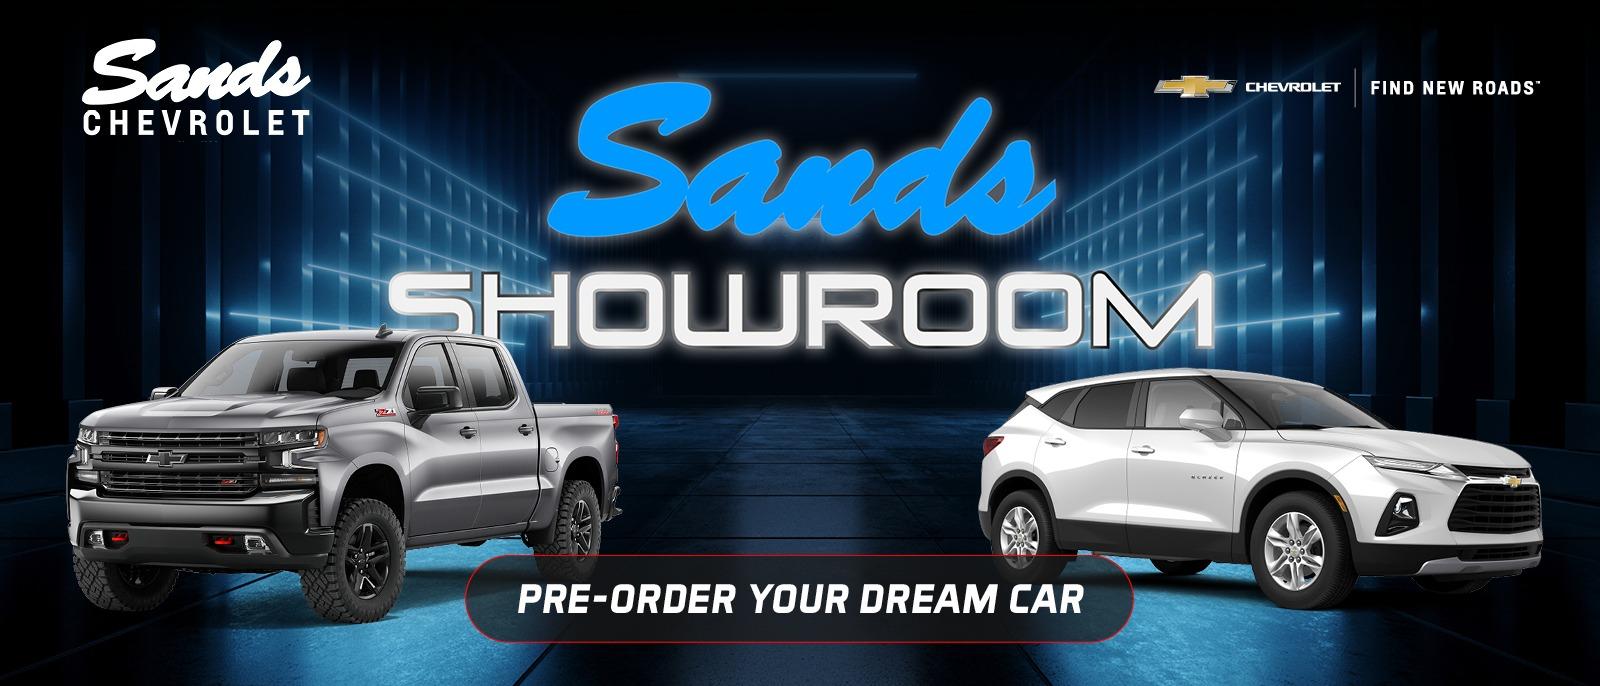 Pre-Order your Dream Car at Sands